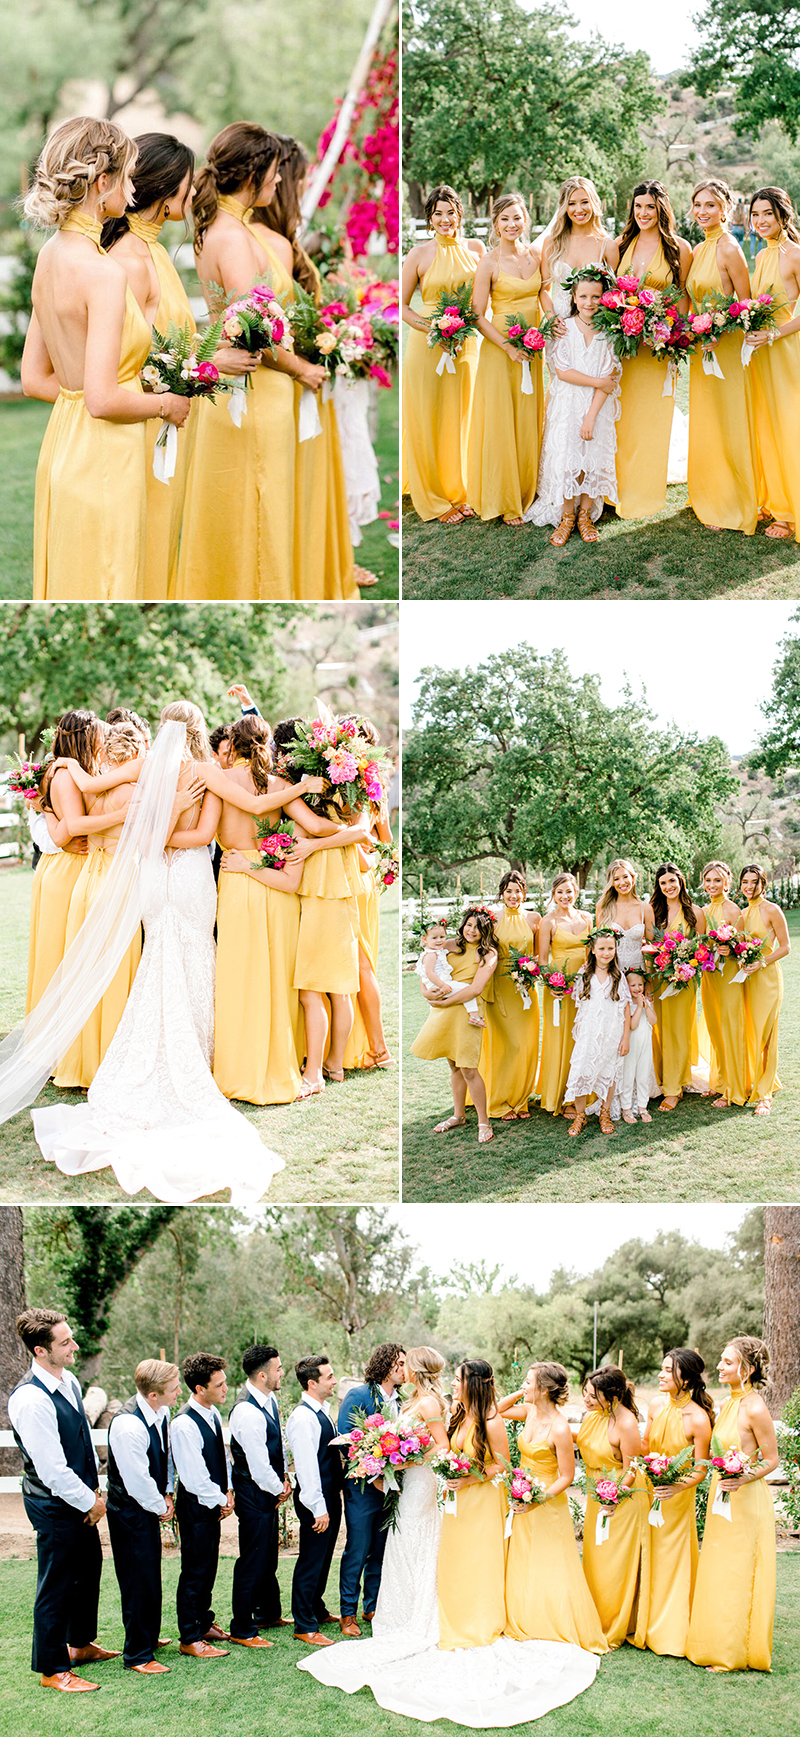 7 Bridesmaid Dress Trends For This Summer and Beyond - Praise Wedding